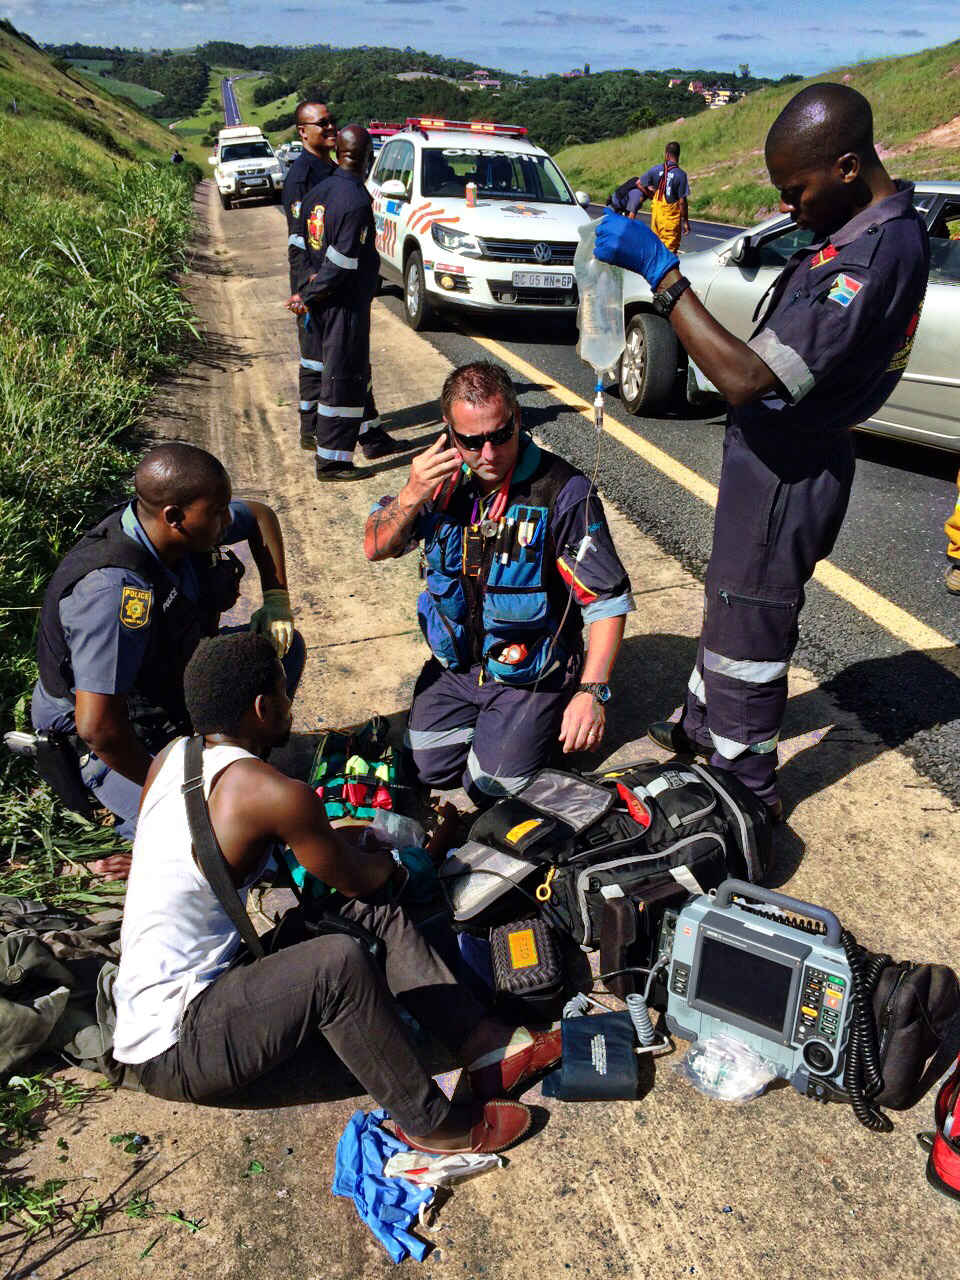 Photos from scene as young boy is evacuated by emergency helicopter from N2 at Hibberdene